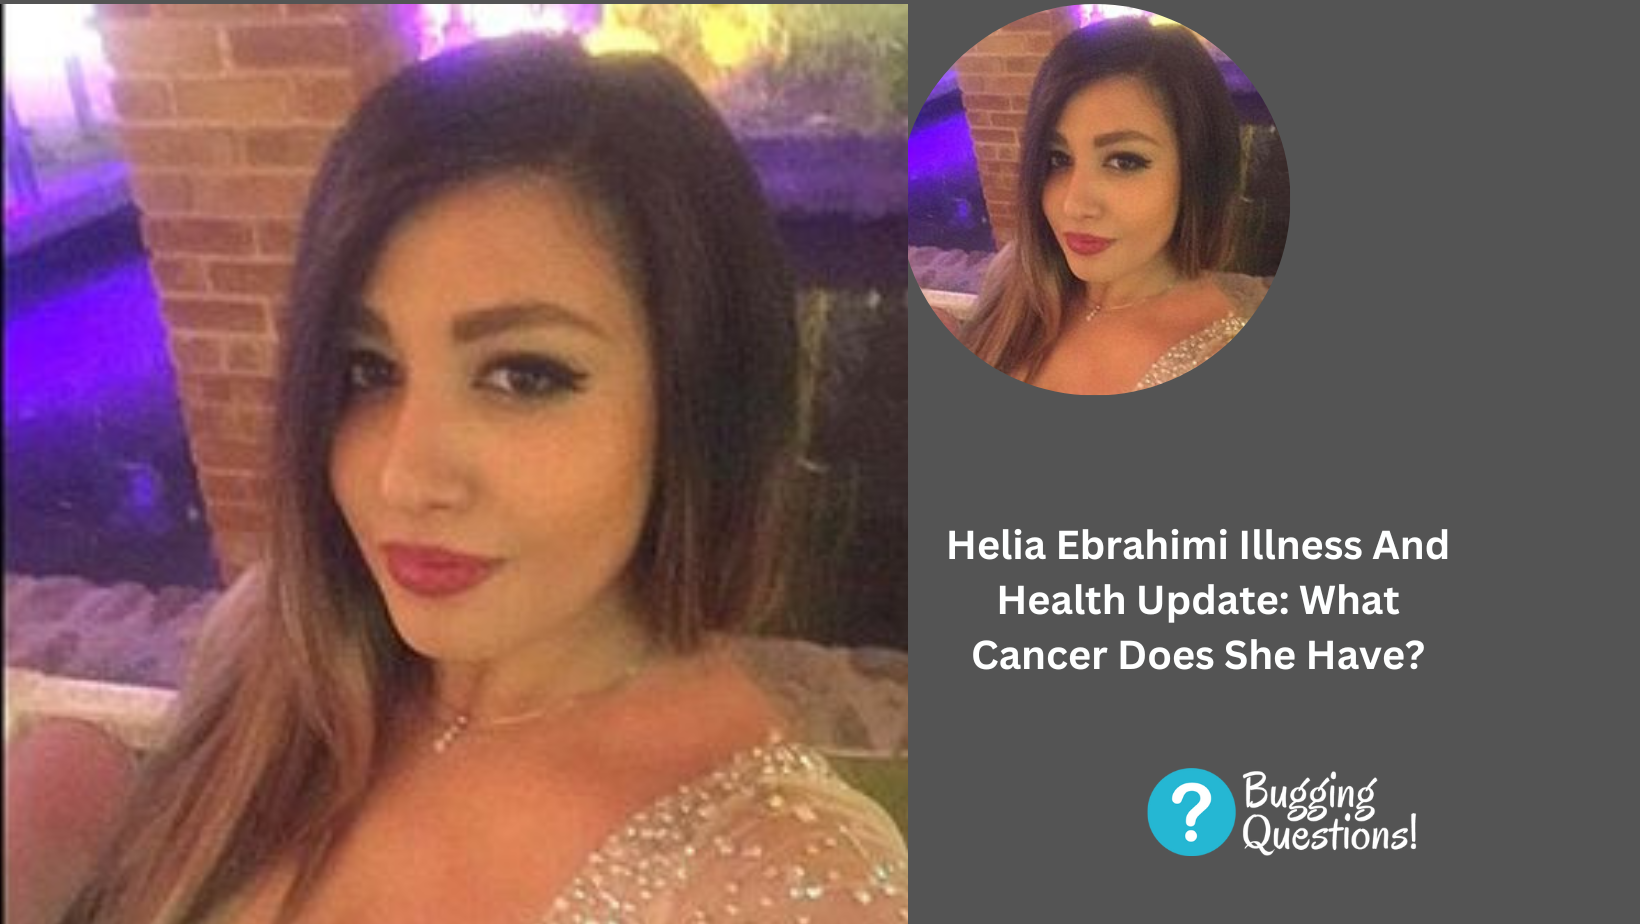 Helia Ebrahimi Illness And Health Update: What Cancer Does She Have?